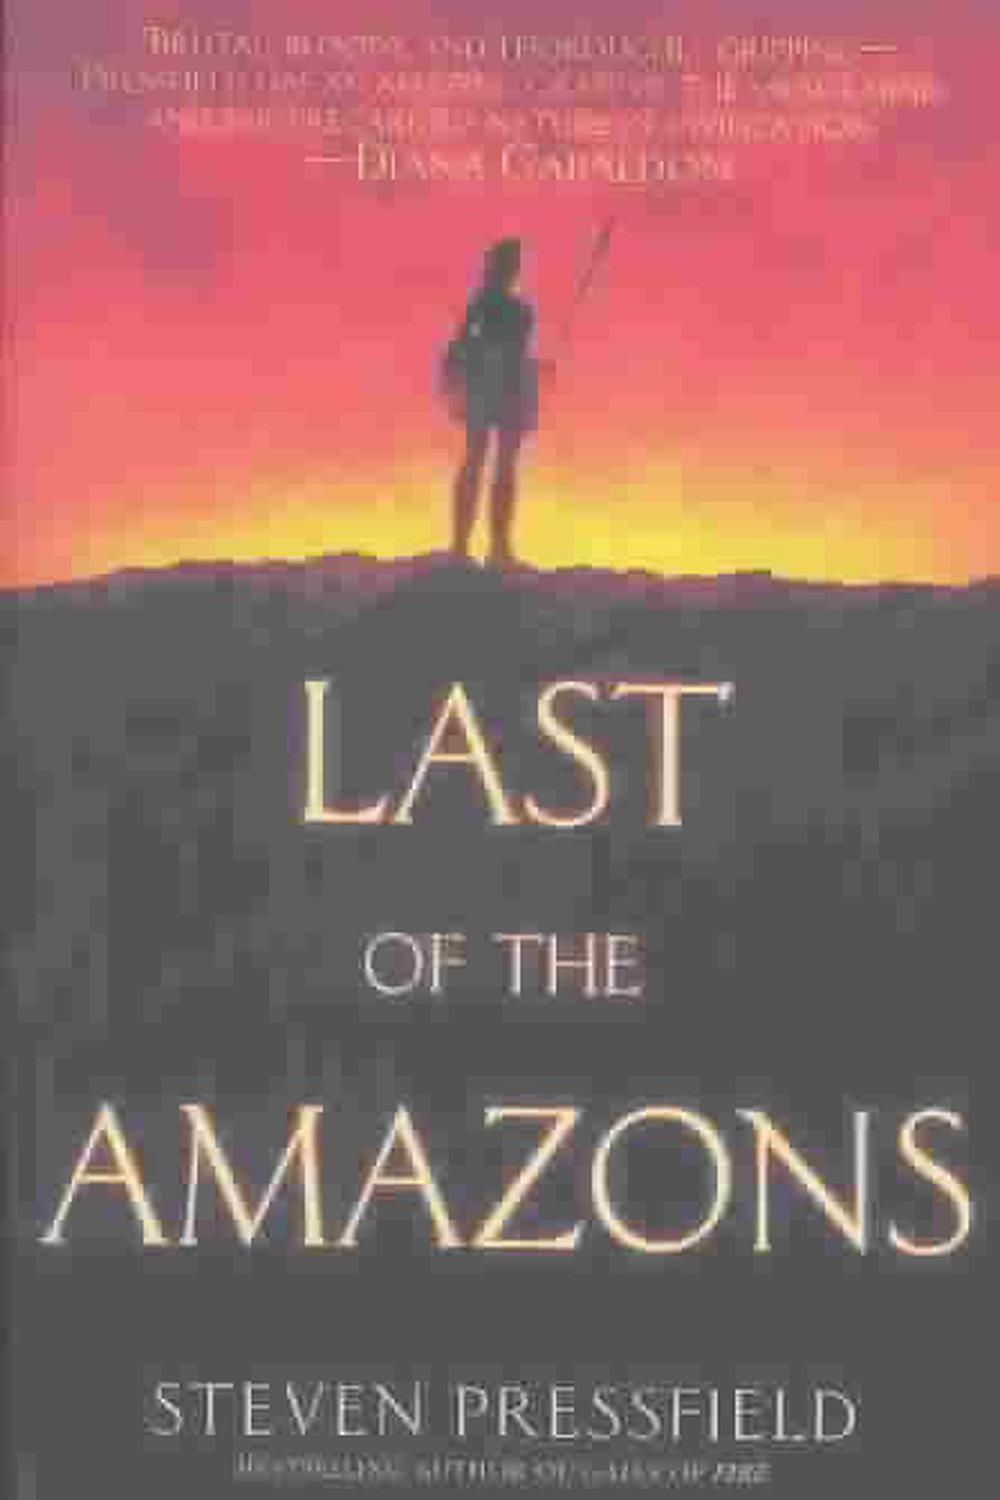 Last of the Amazons by Steven Pressfield